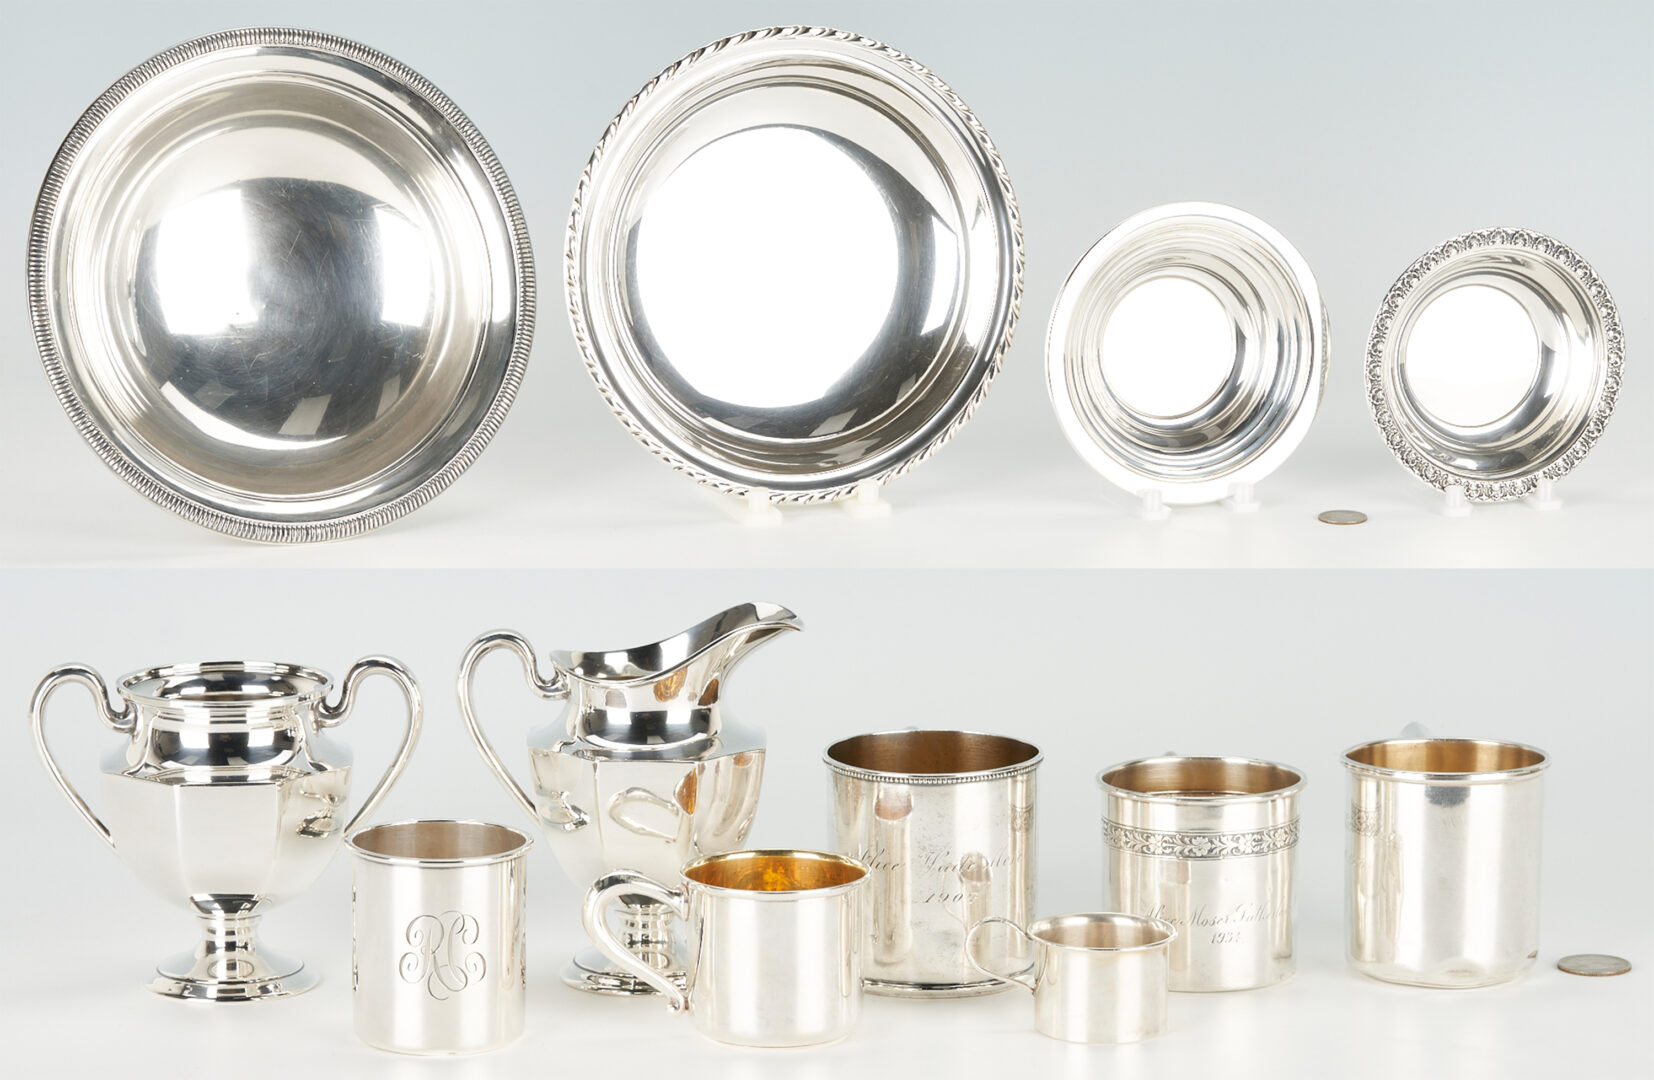 Lot 178: 12 Assorted Sterling Silver Hollowware Items, incl. Child's Cups